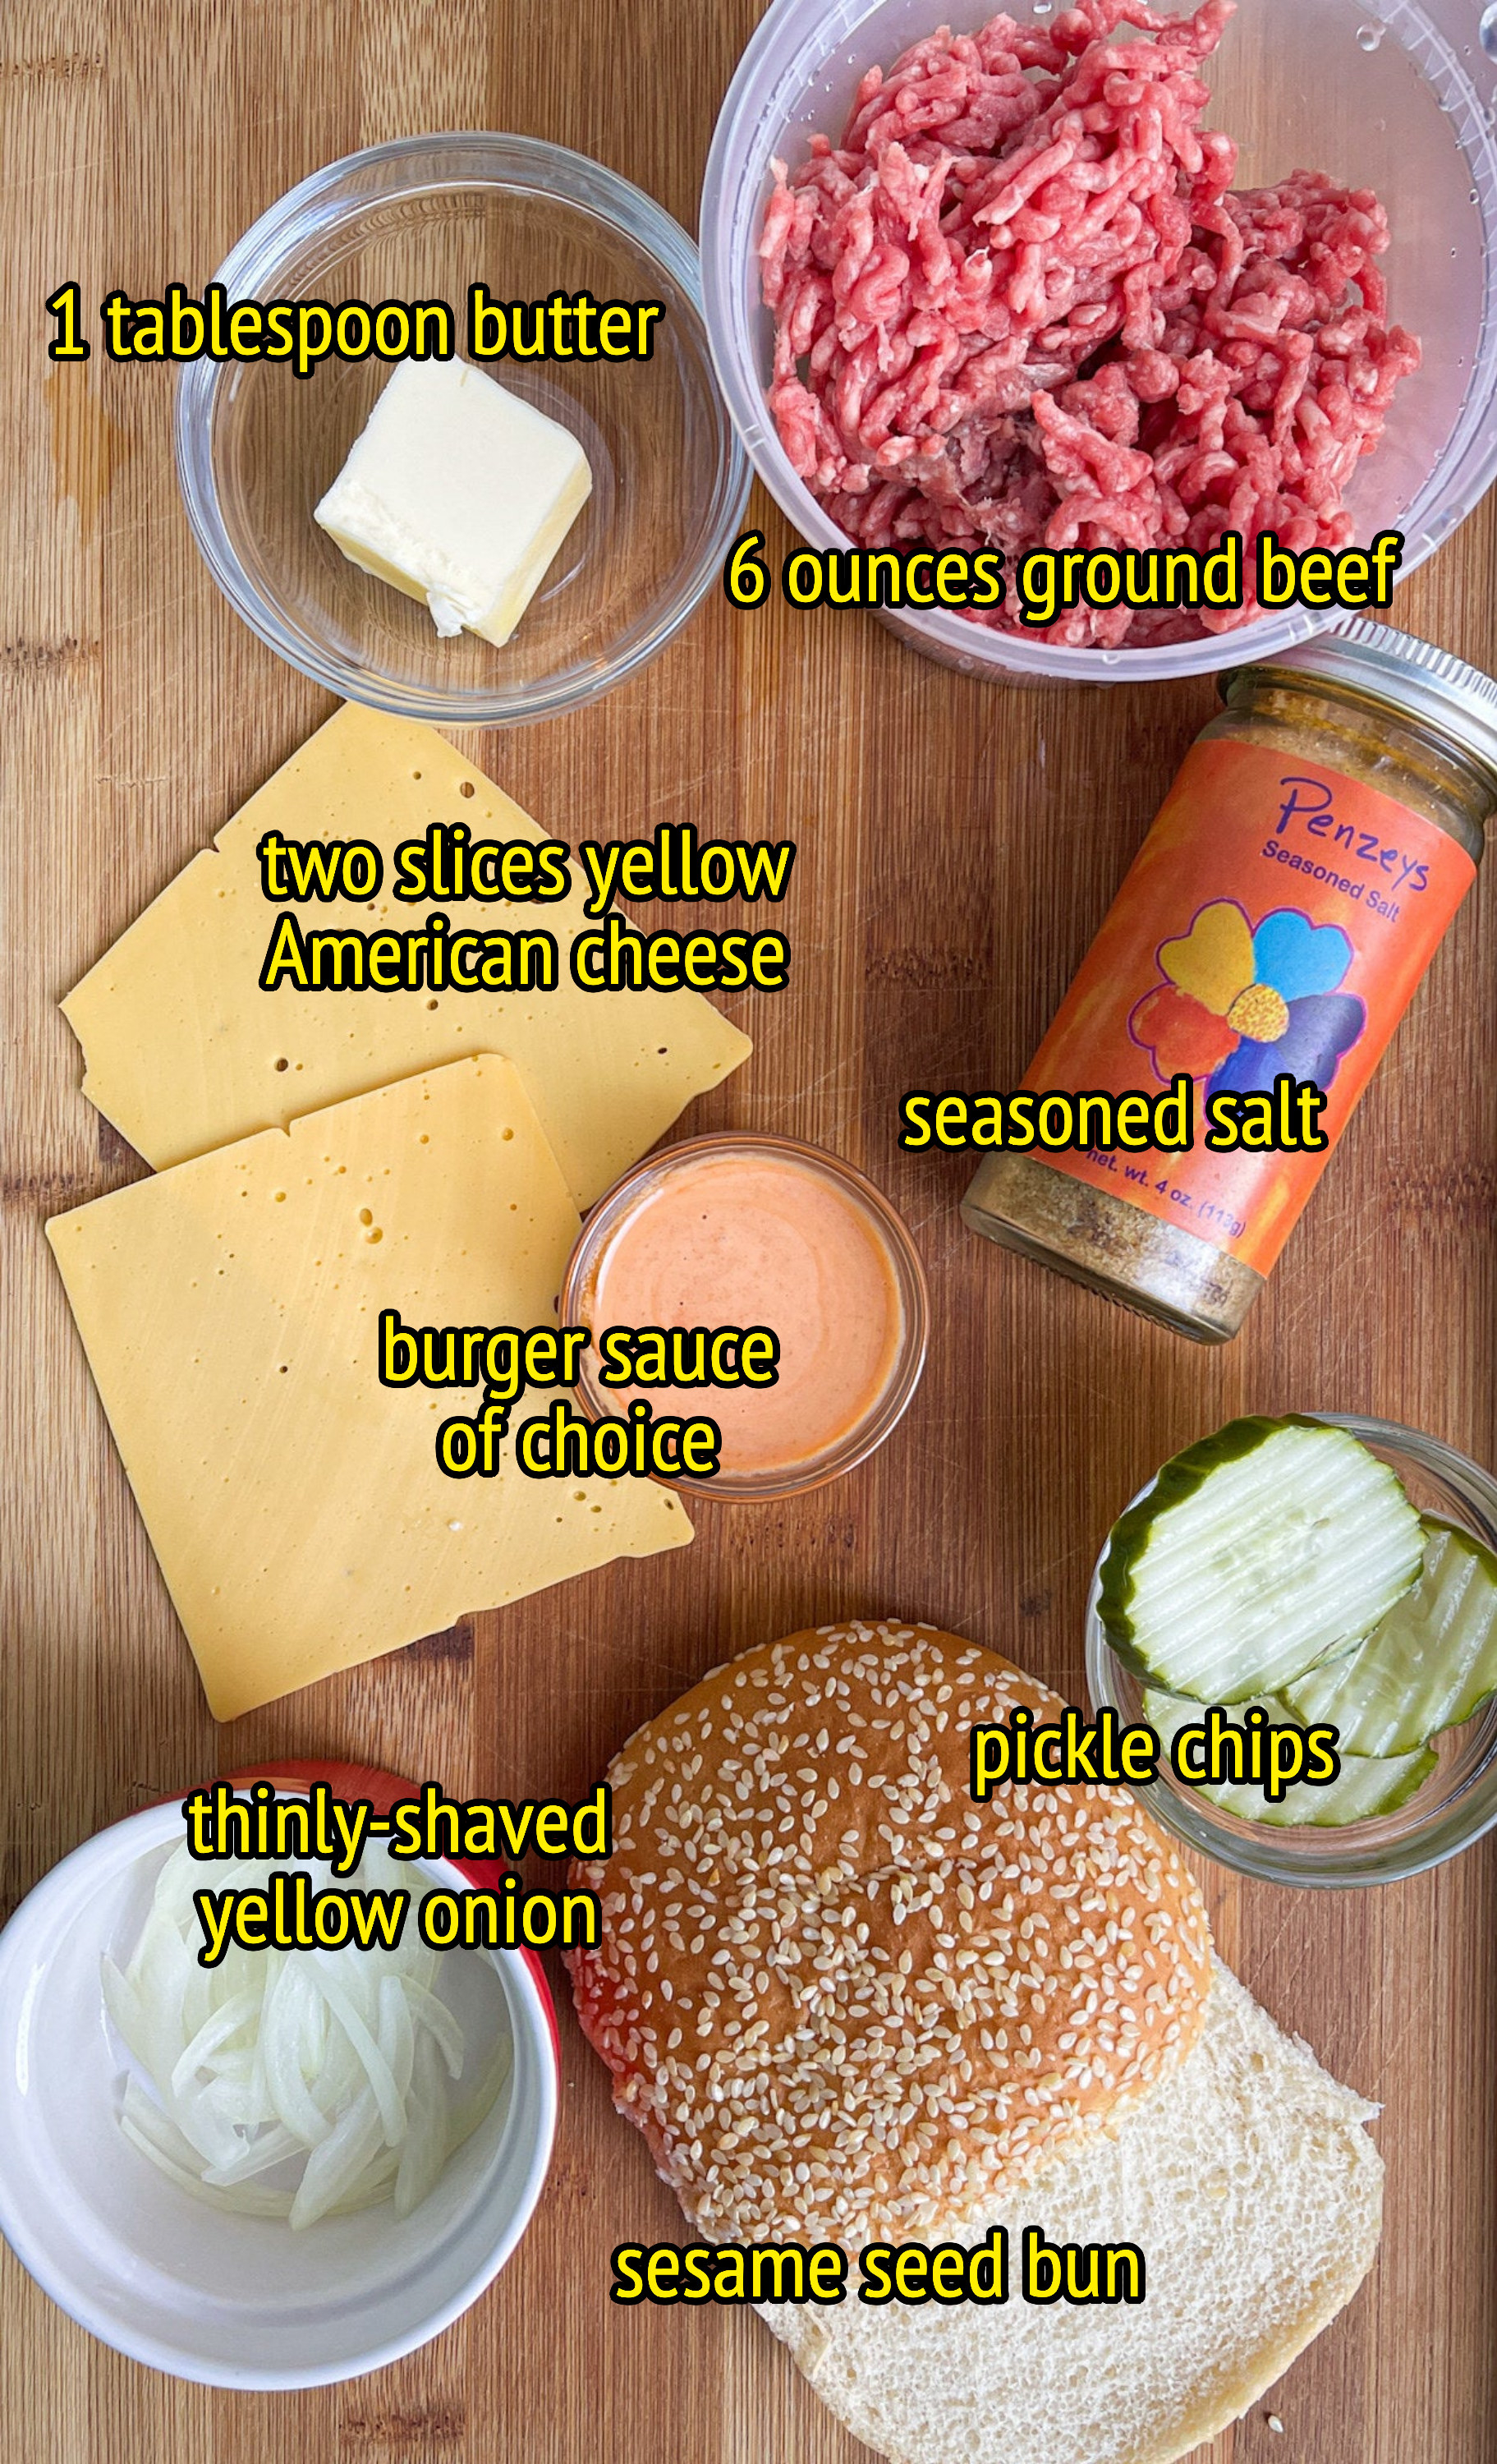 1 tablespoon butter, 6 ounces ground beef, two slices yellow american cheese, seasoned salt, burger sauce of choice, pickle chips, thinly shaved yellow onion, sesame seed bun